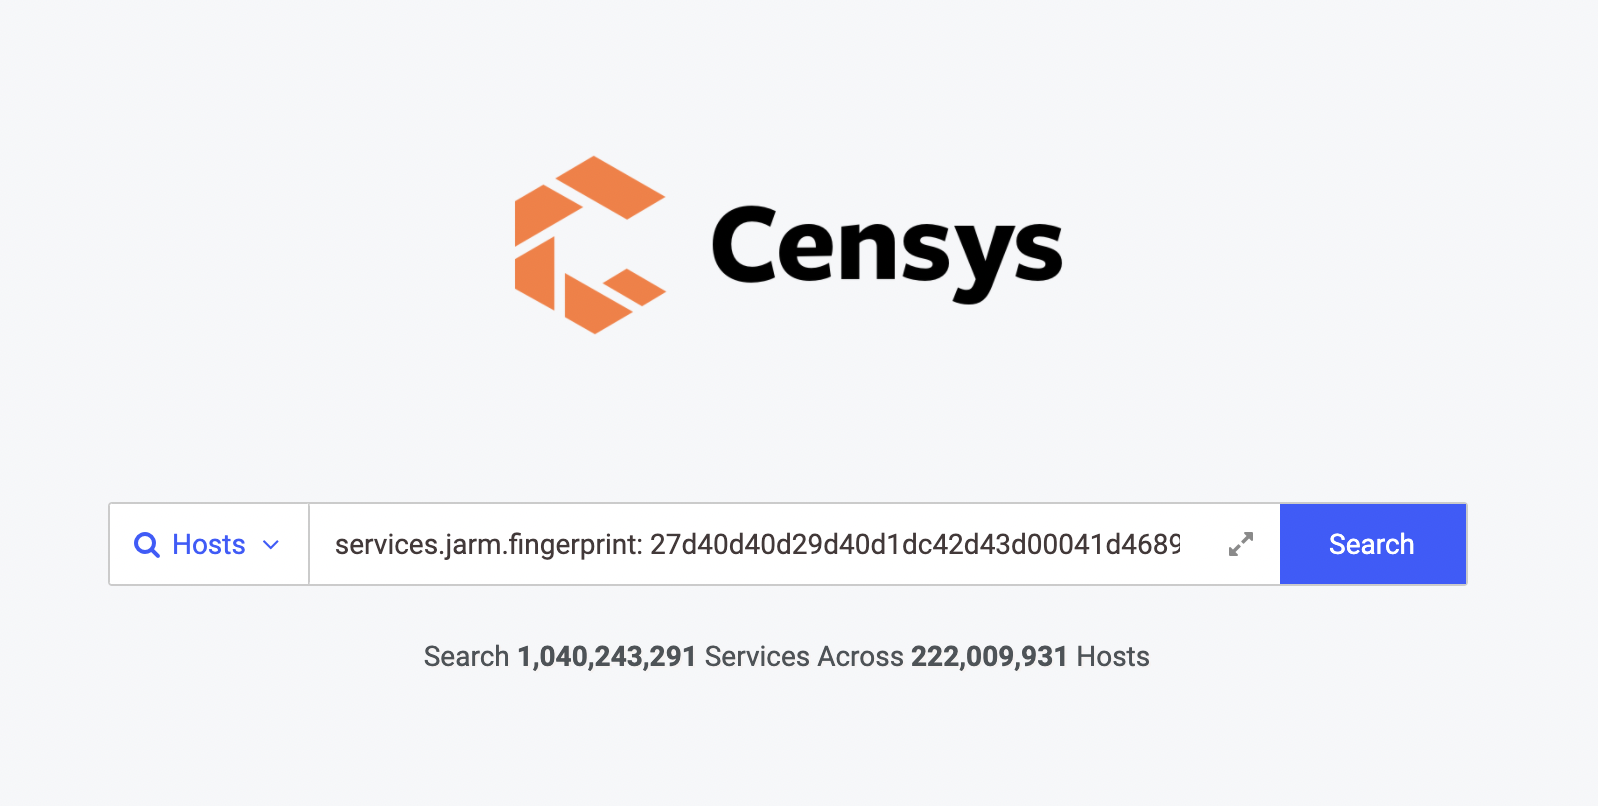 Censys Search 2.0 front page with example jarm fingerprint search shown